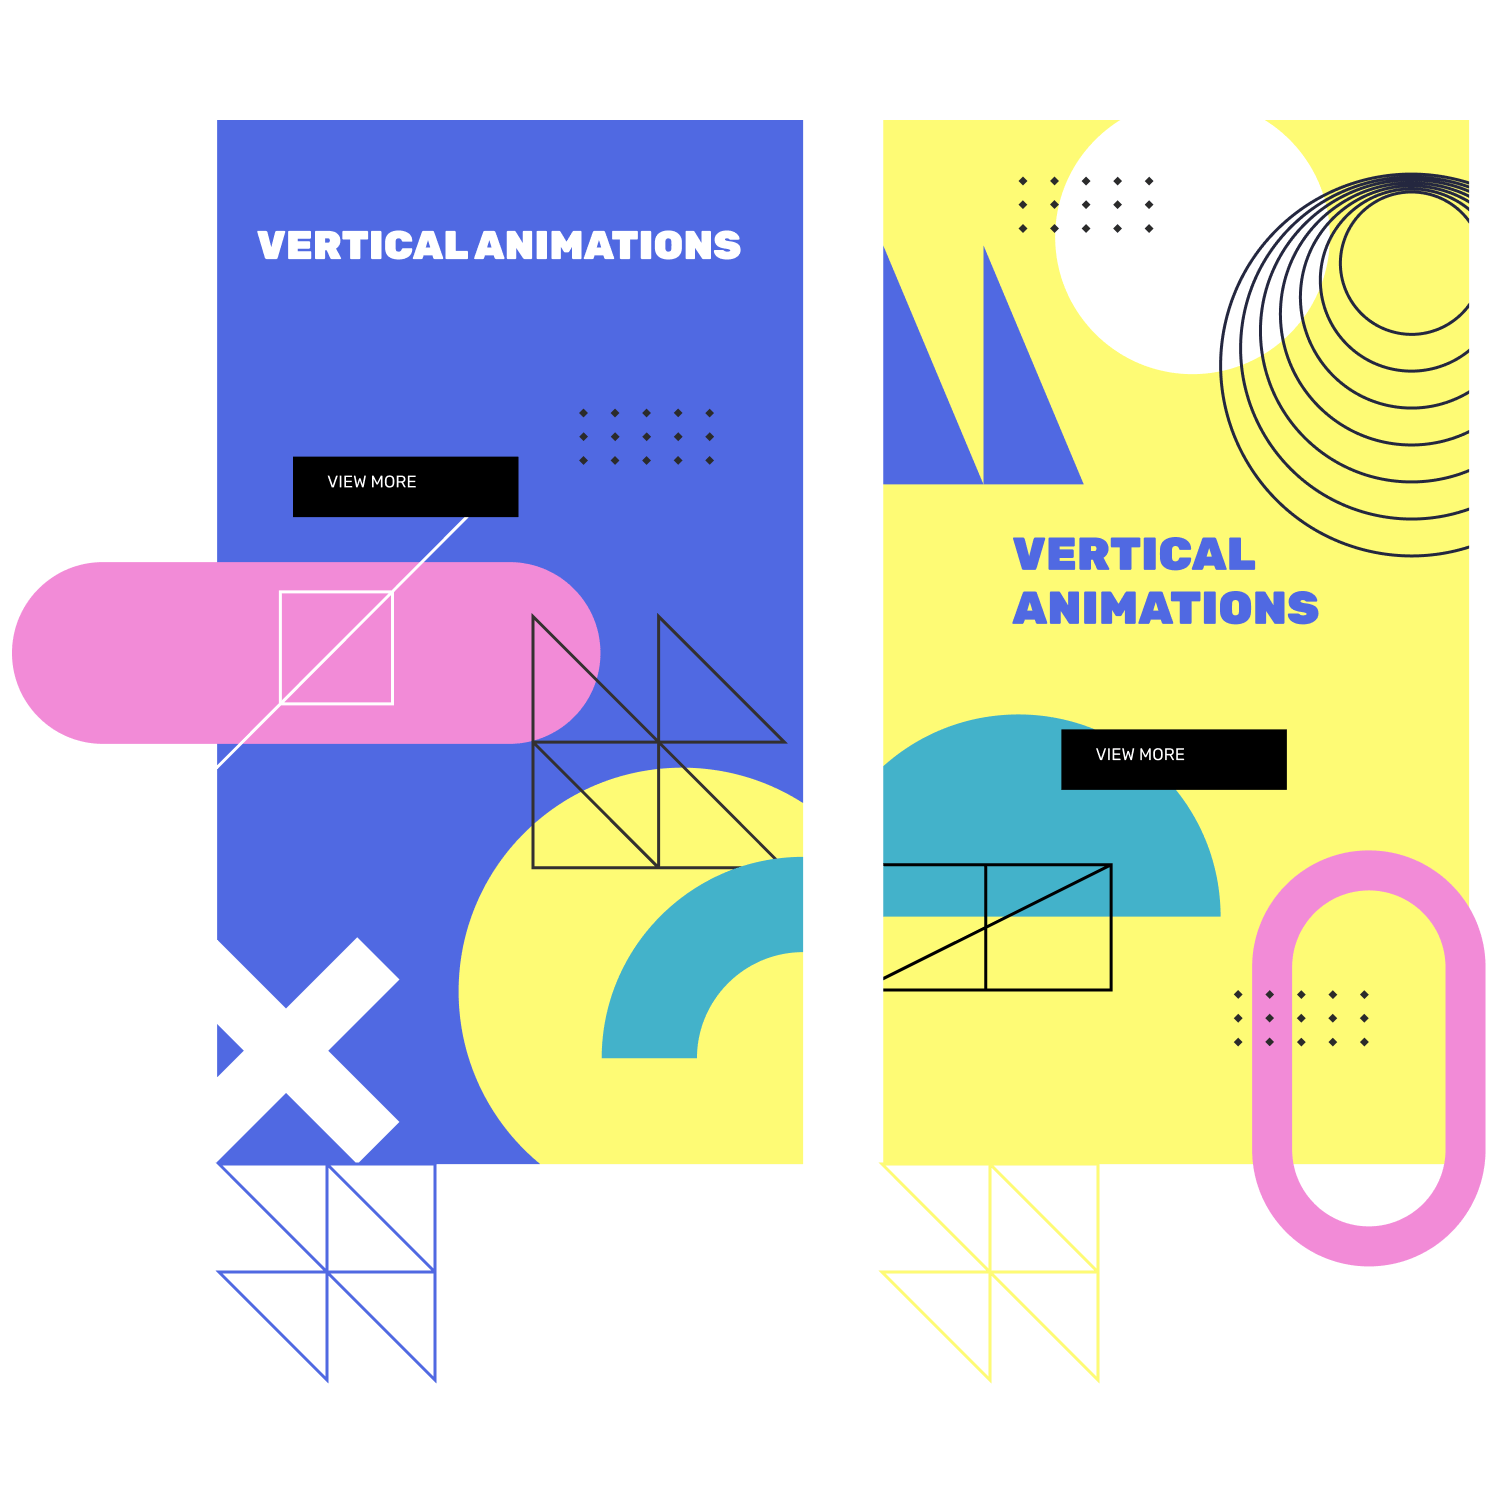 Vertical animations